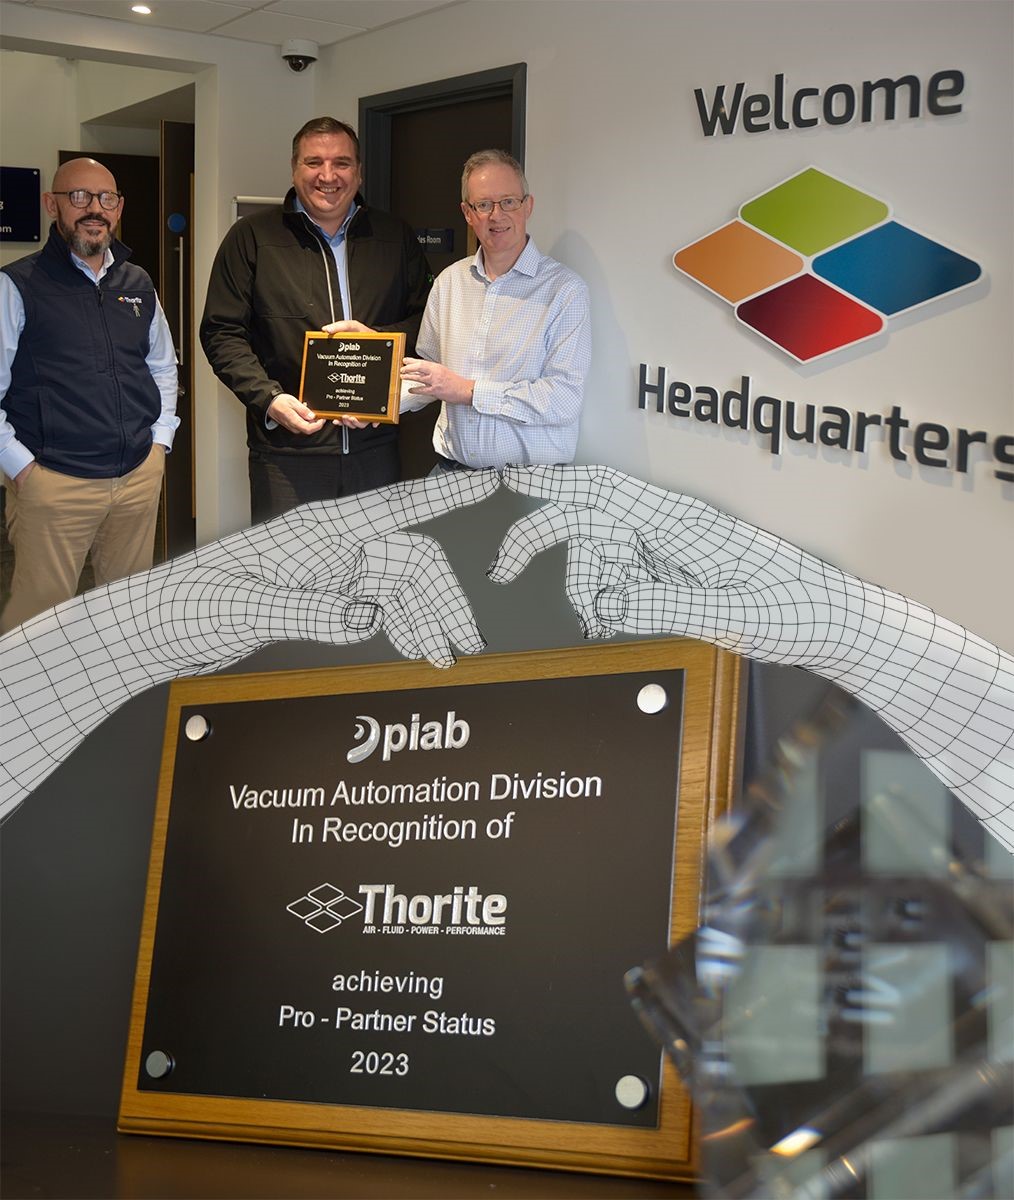 Thorite awarded Pro-Partner status by global brand Piab Customers will benefit from enhanced working relationship